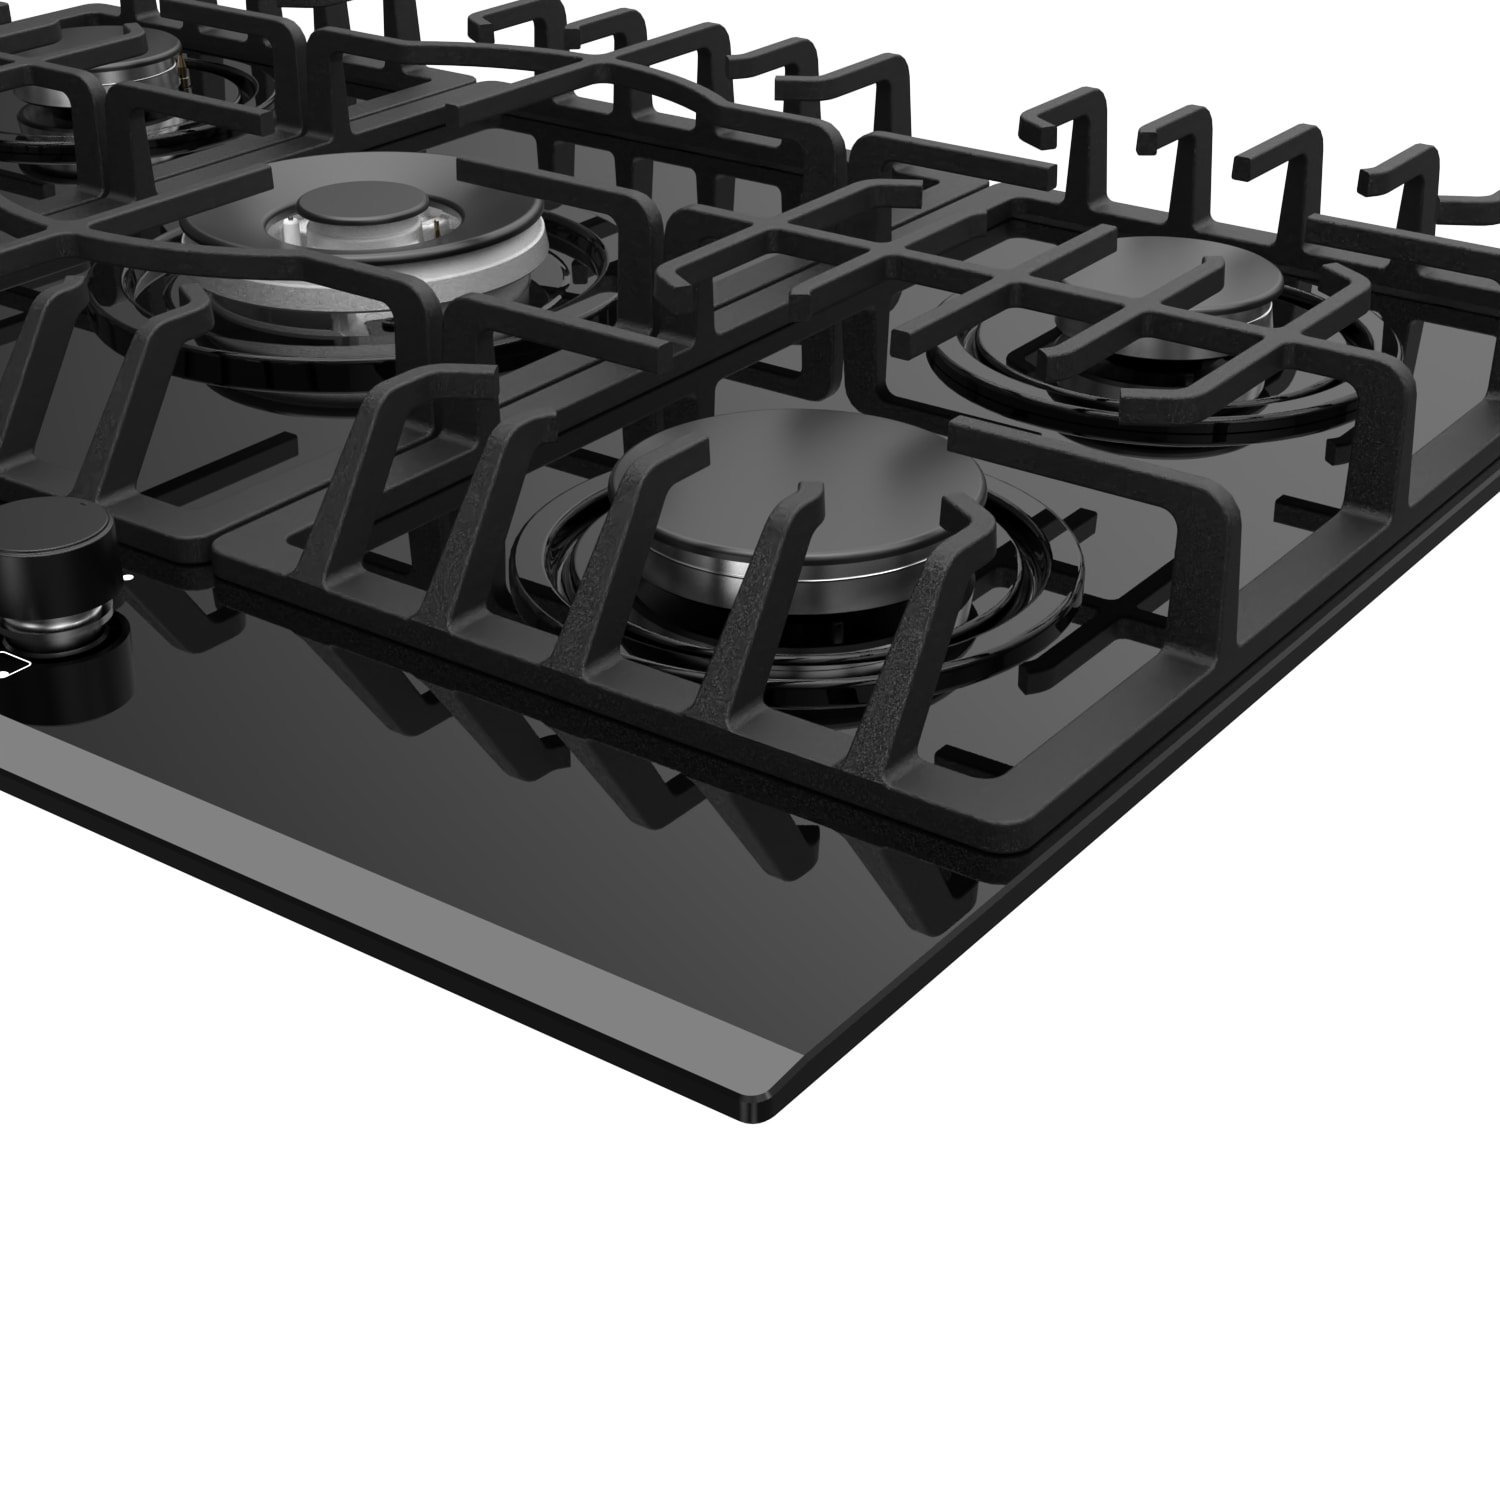 MIDUO 35 Black Tempered Glass Panel Built-in Gas Cooktop, 5 Burners  Built-in Gas Cooktop Aluminum Stove Head + Enamel Cover NG/LPG Kitchen  Built-In